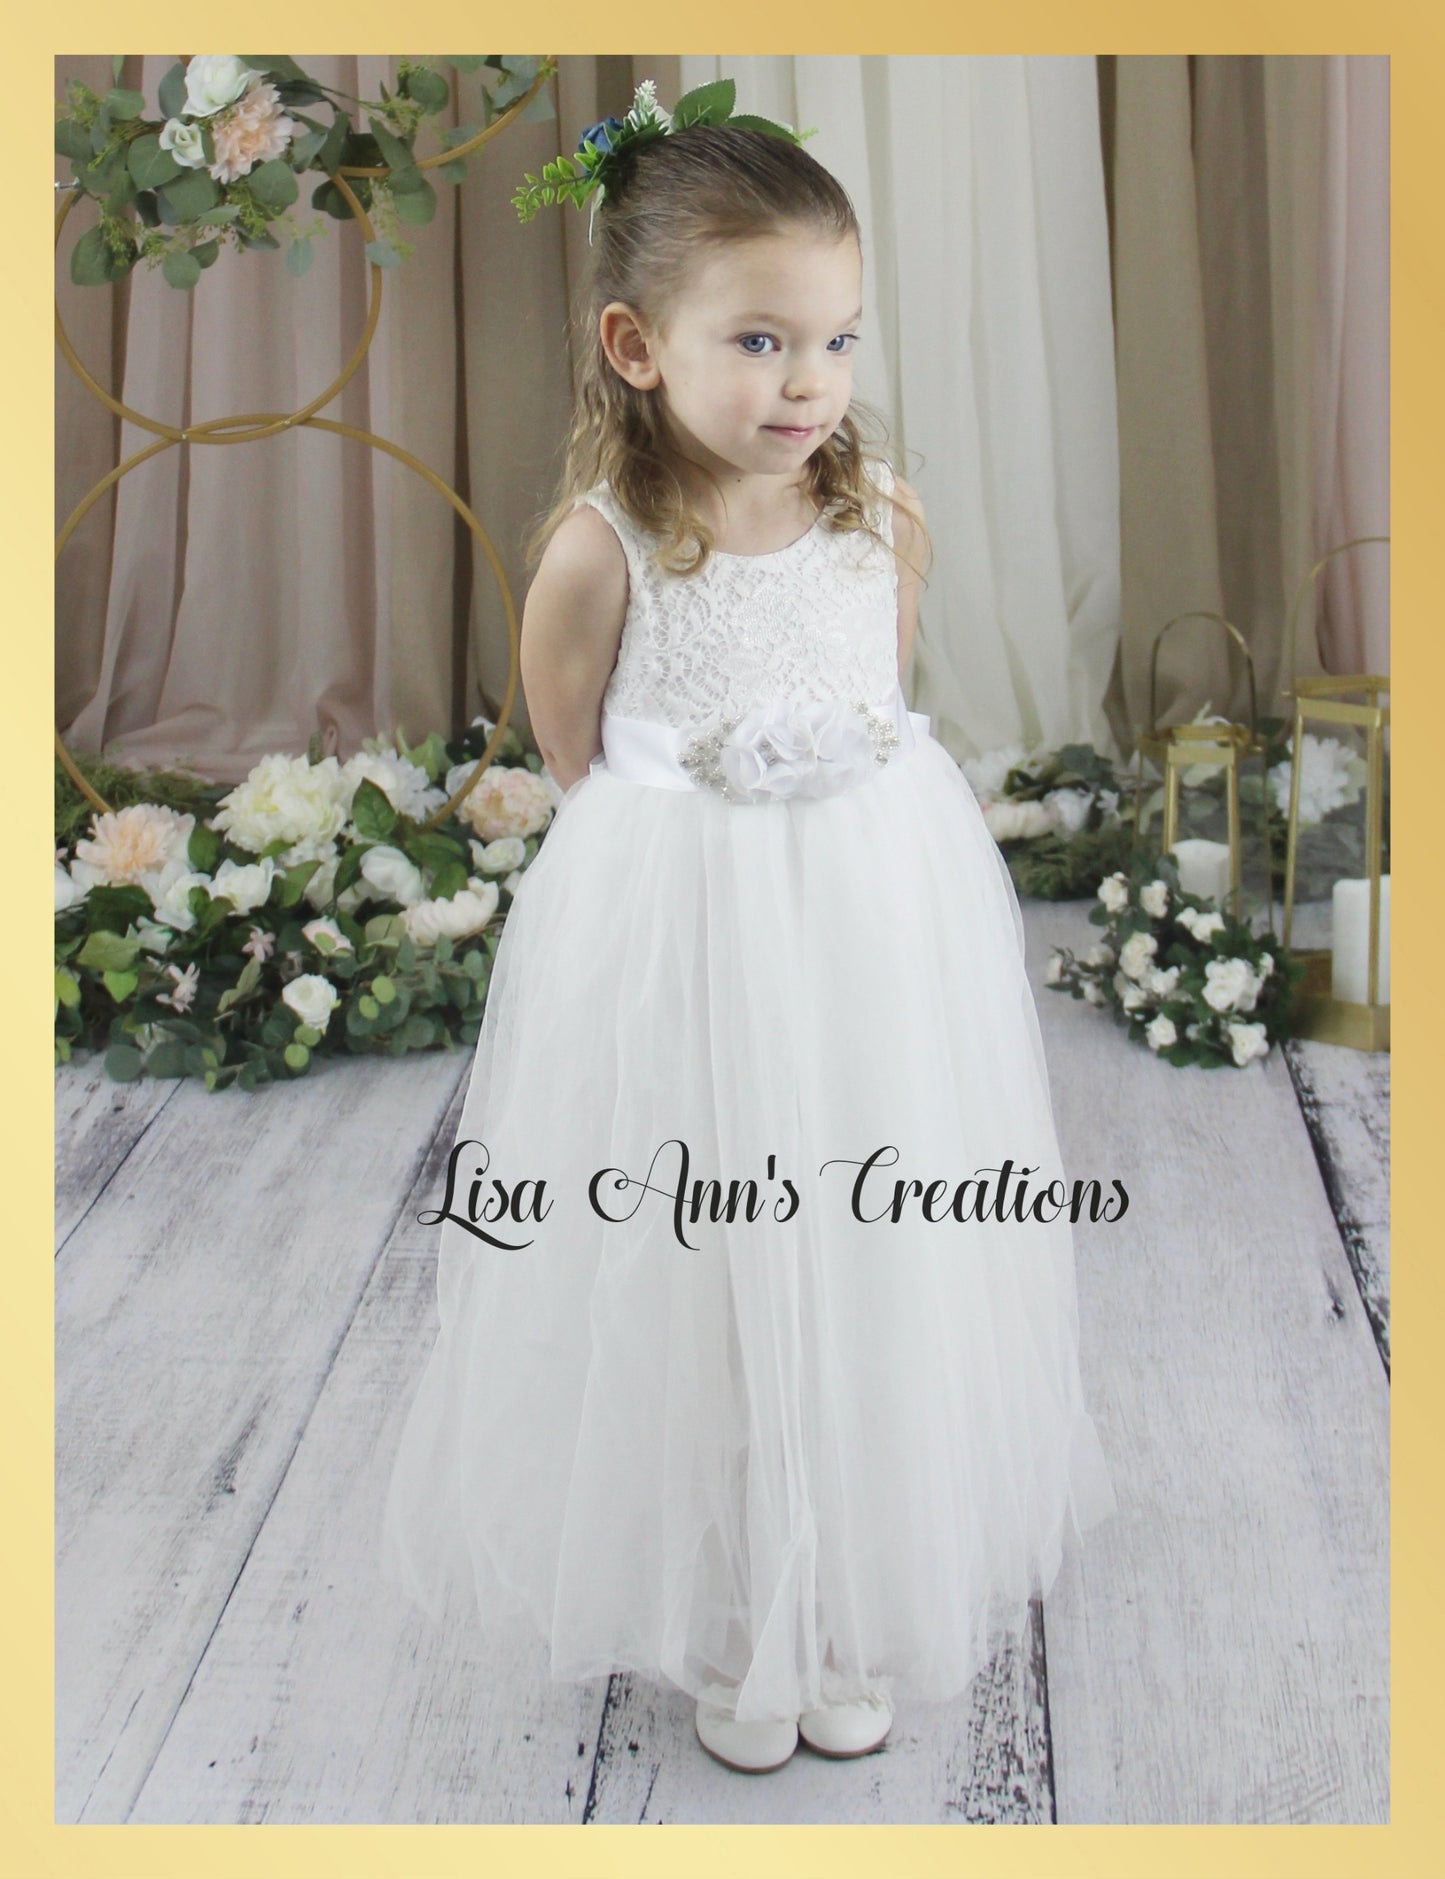 Flower girl dresses in all white tulle and lace